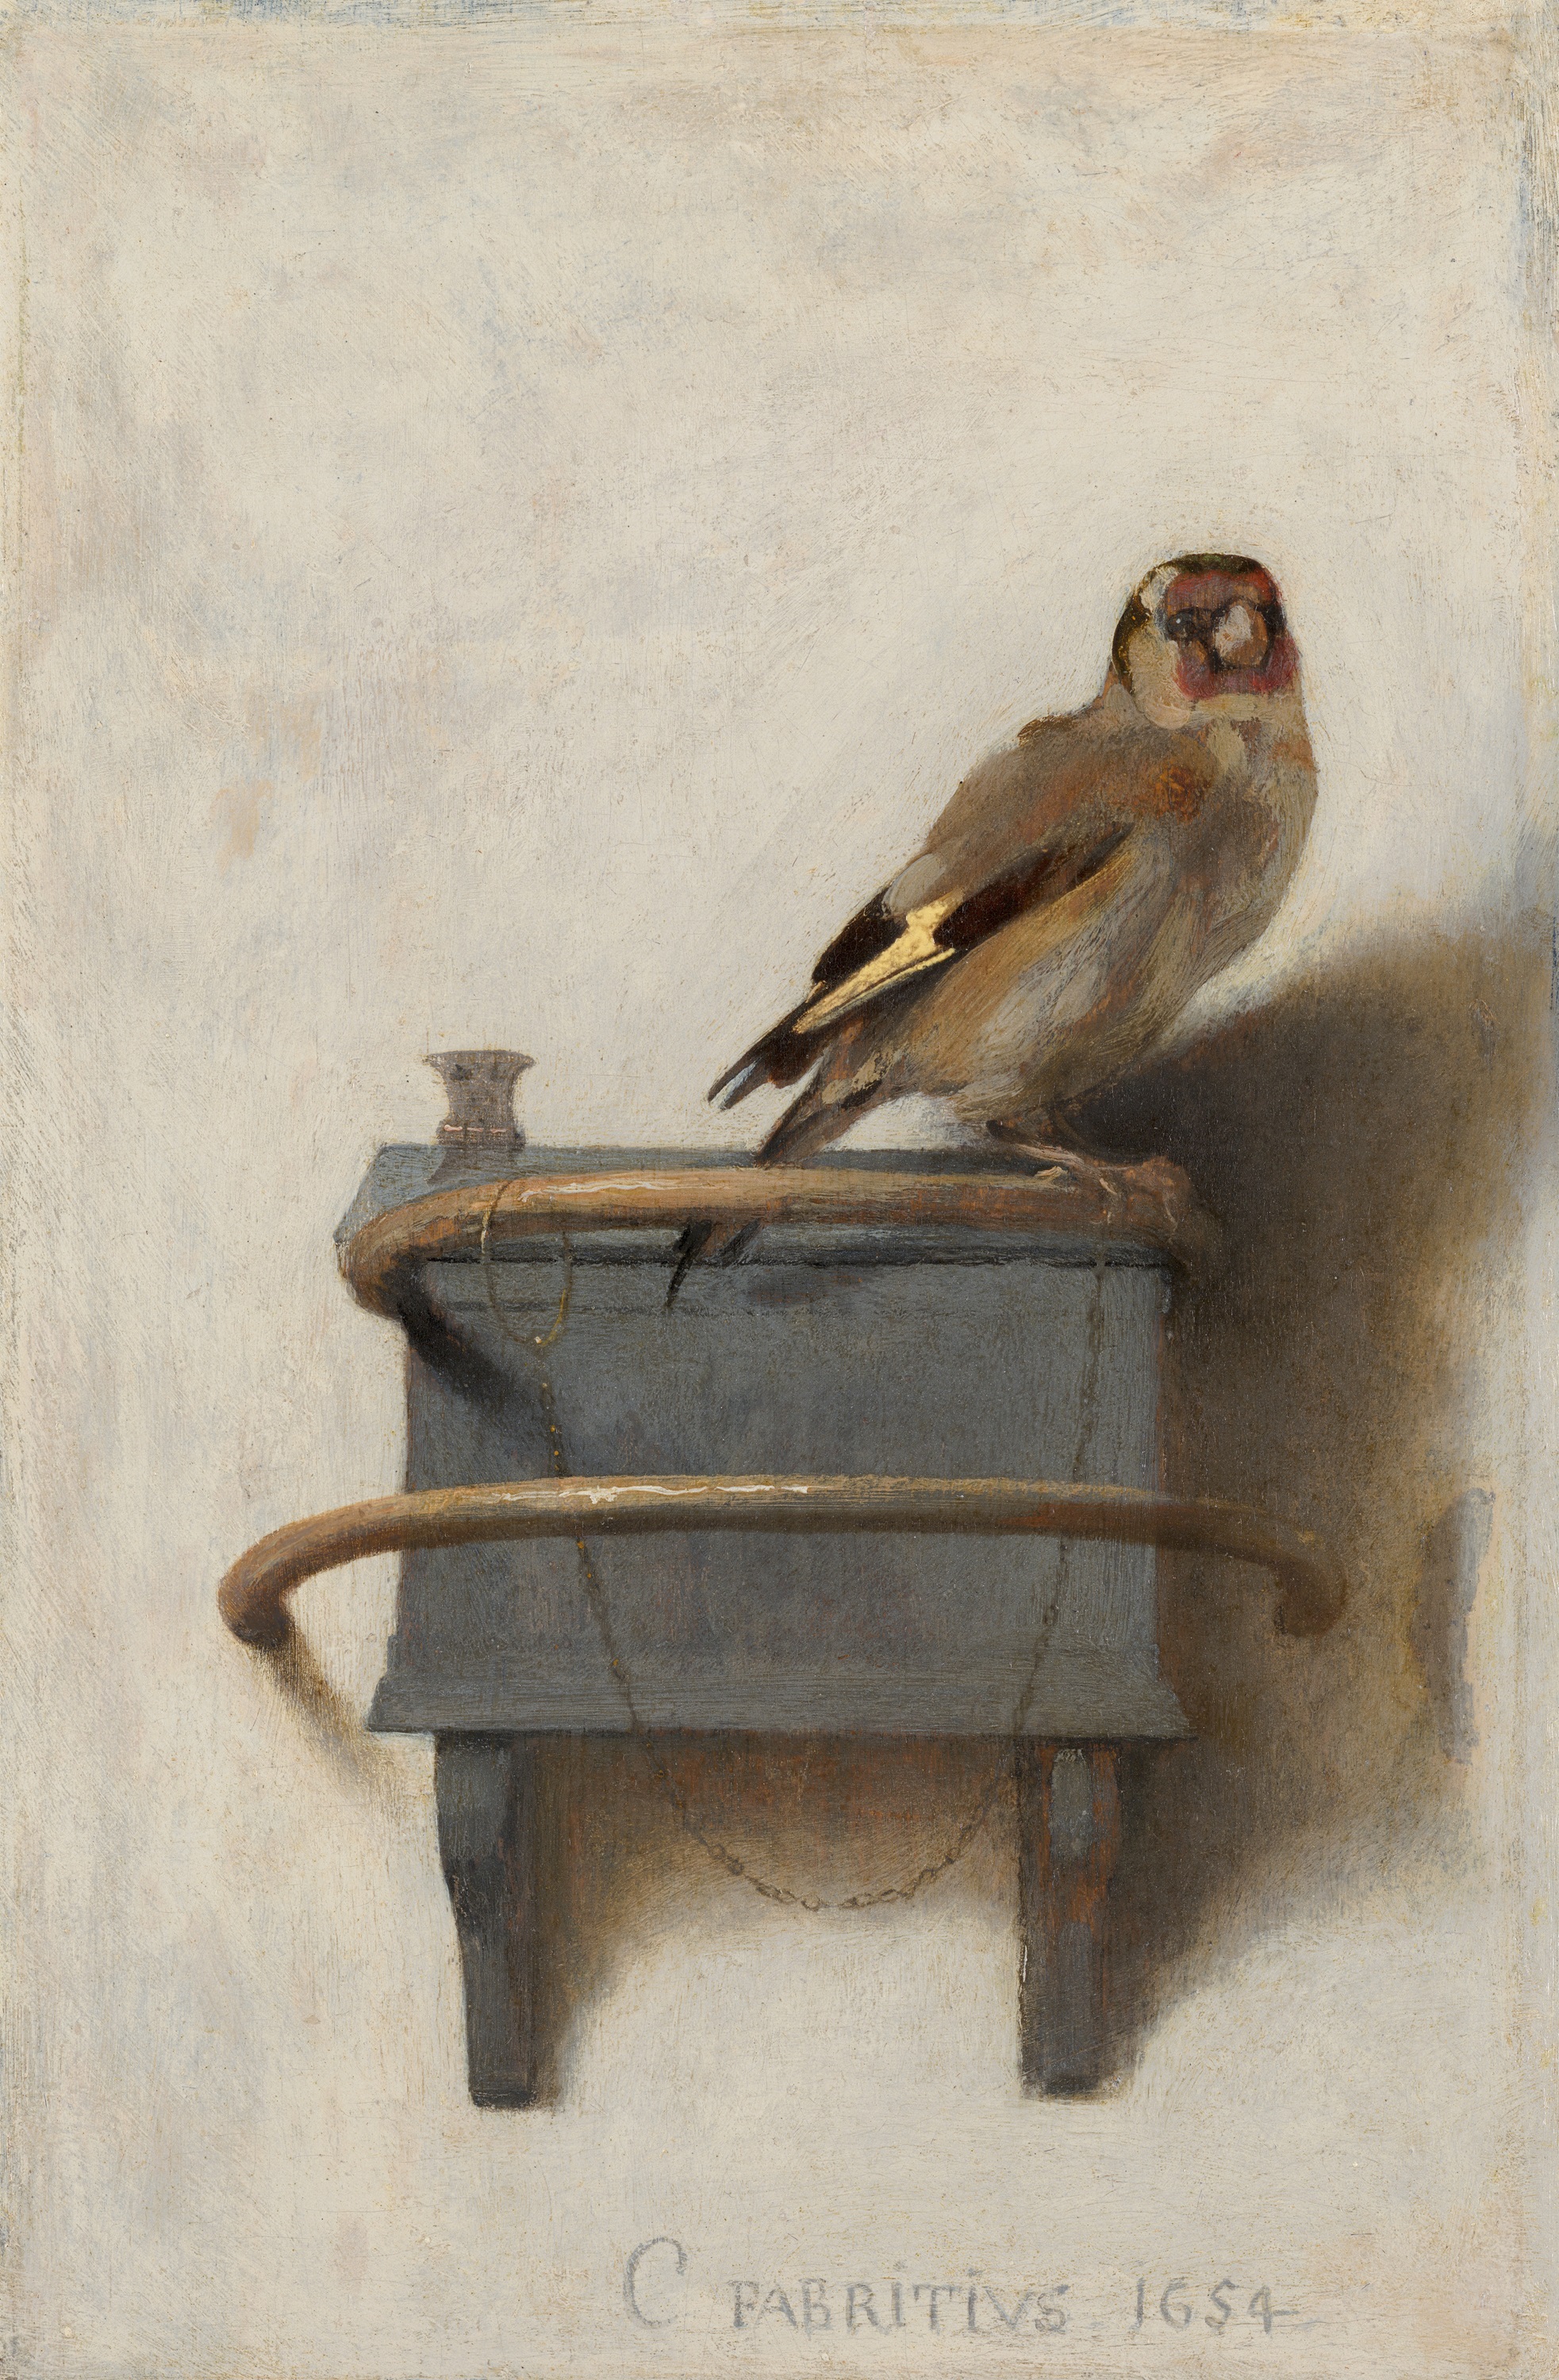 The Goldfinch by Carel Fabritius - 1654 - 33.5 by 22.8 cm Mauritshuis, The Hague